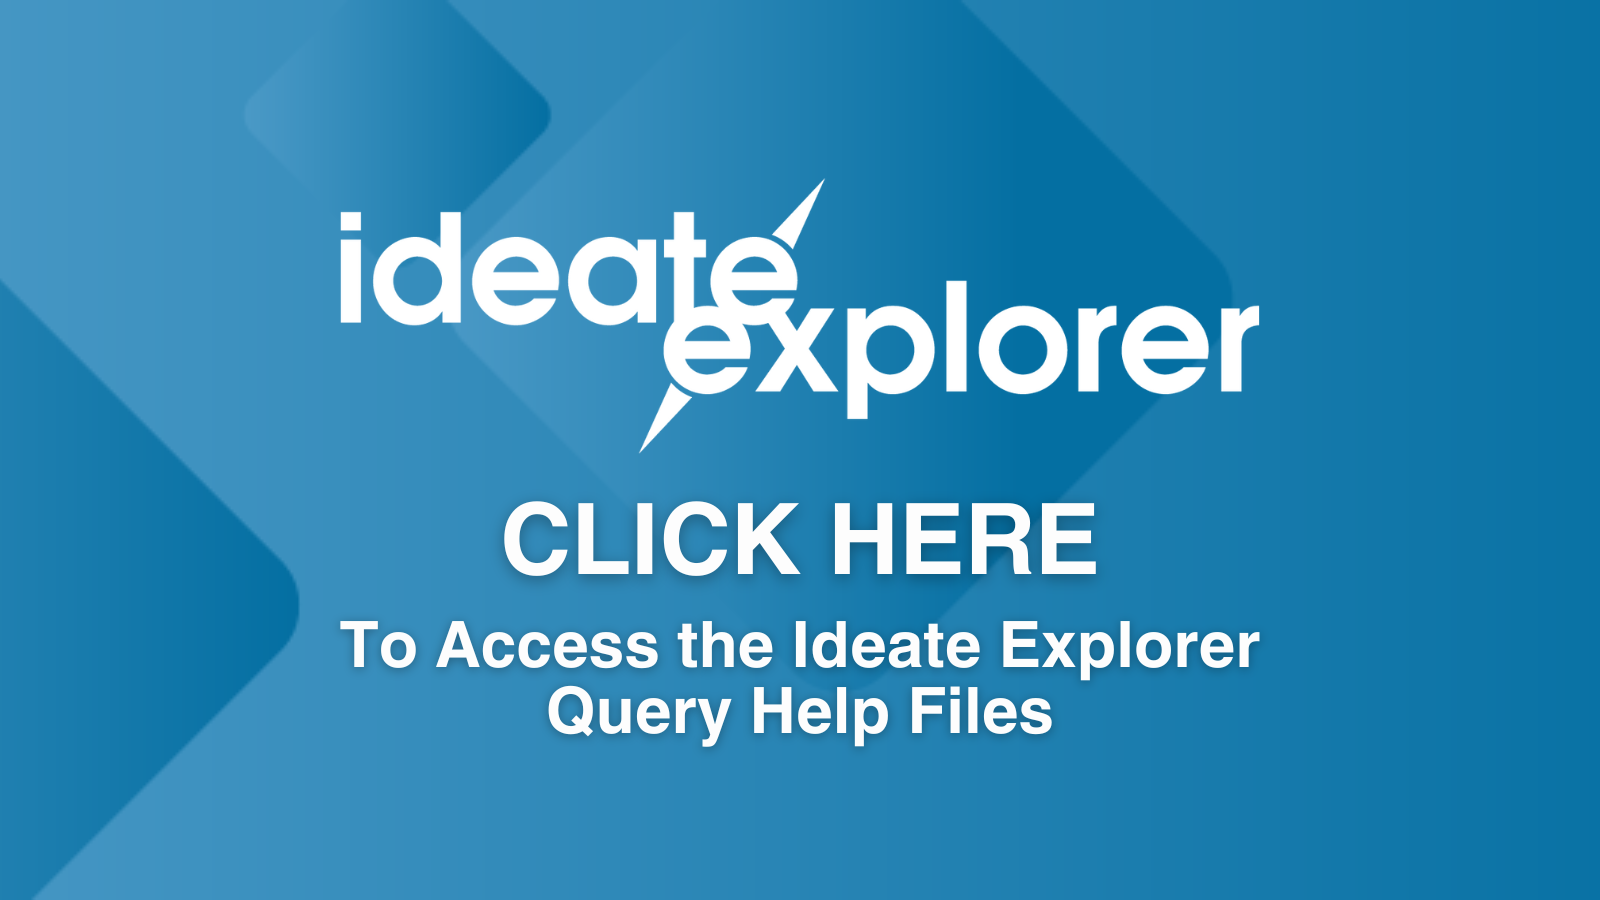 Introduction to Ideate Explorer Query